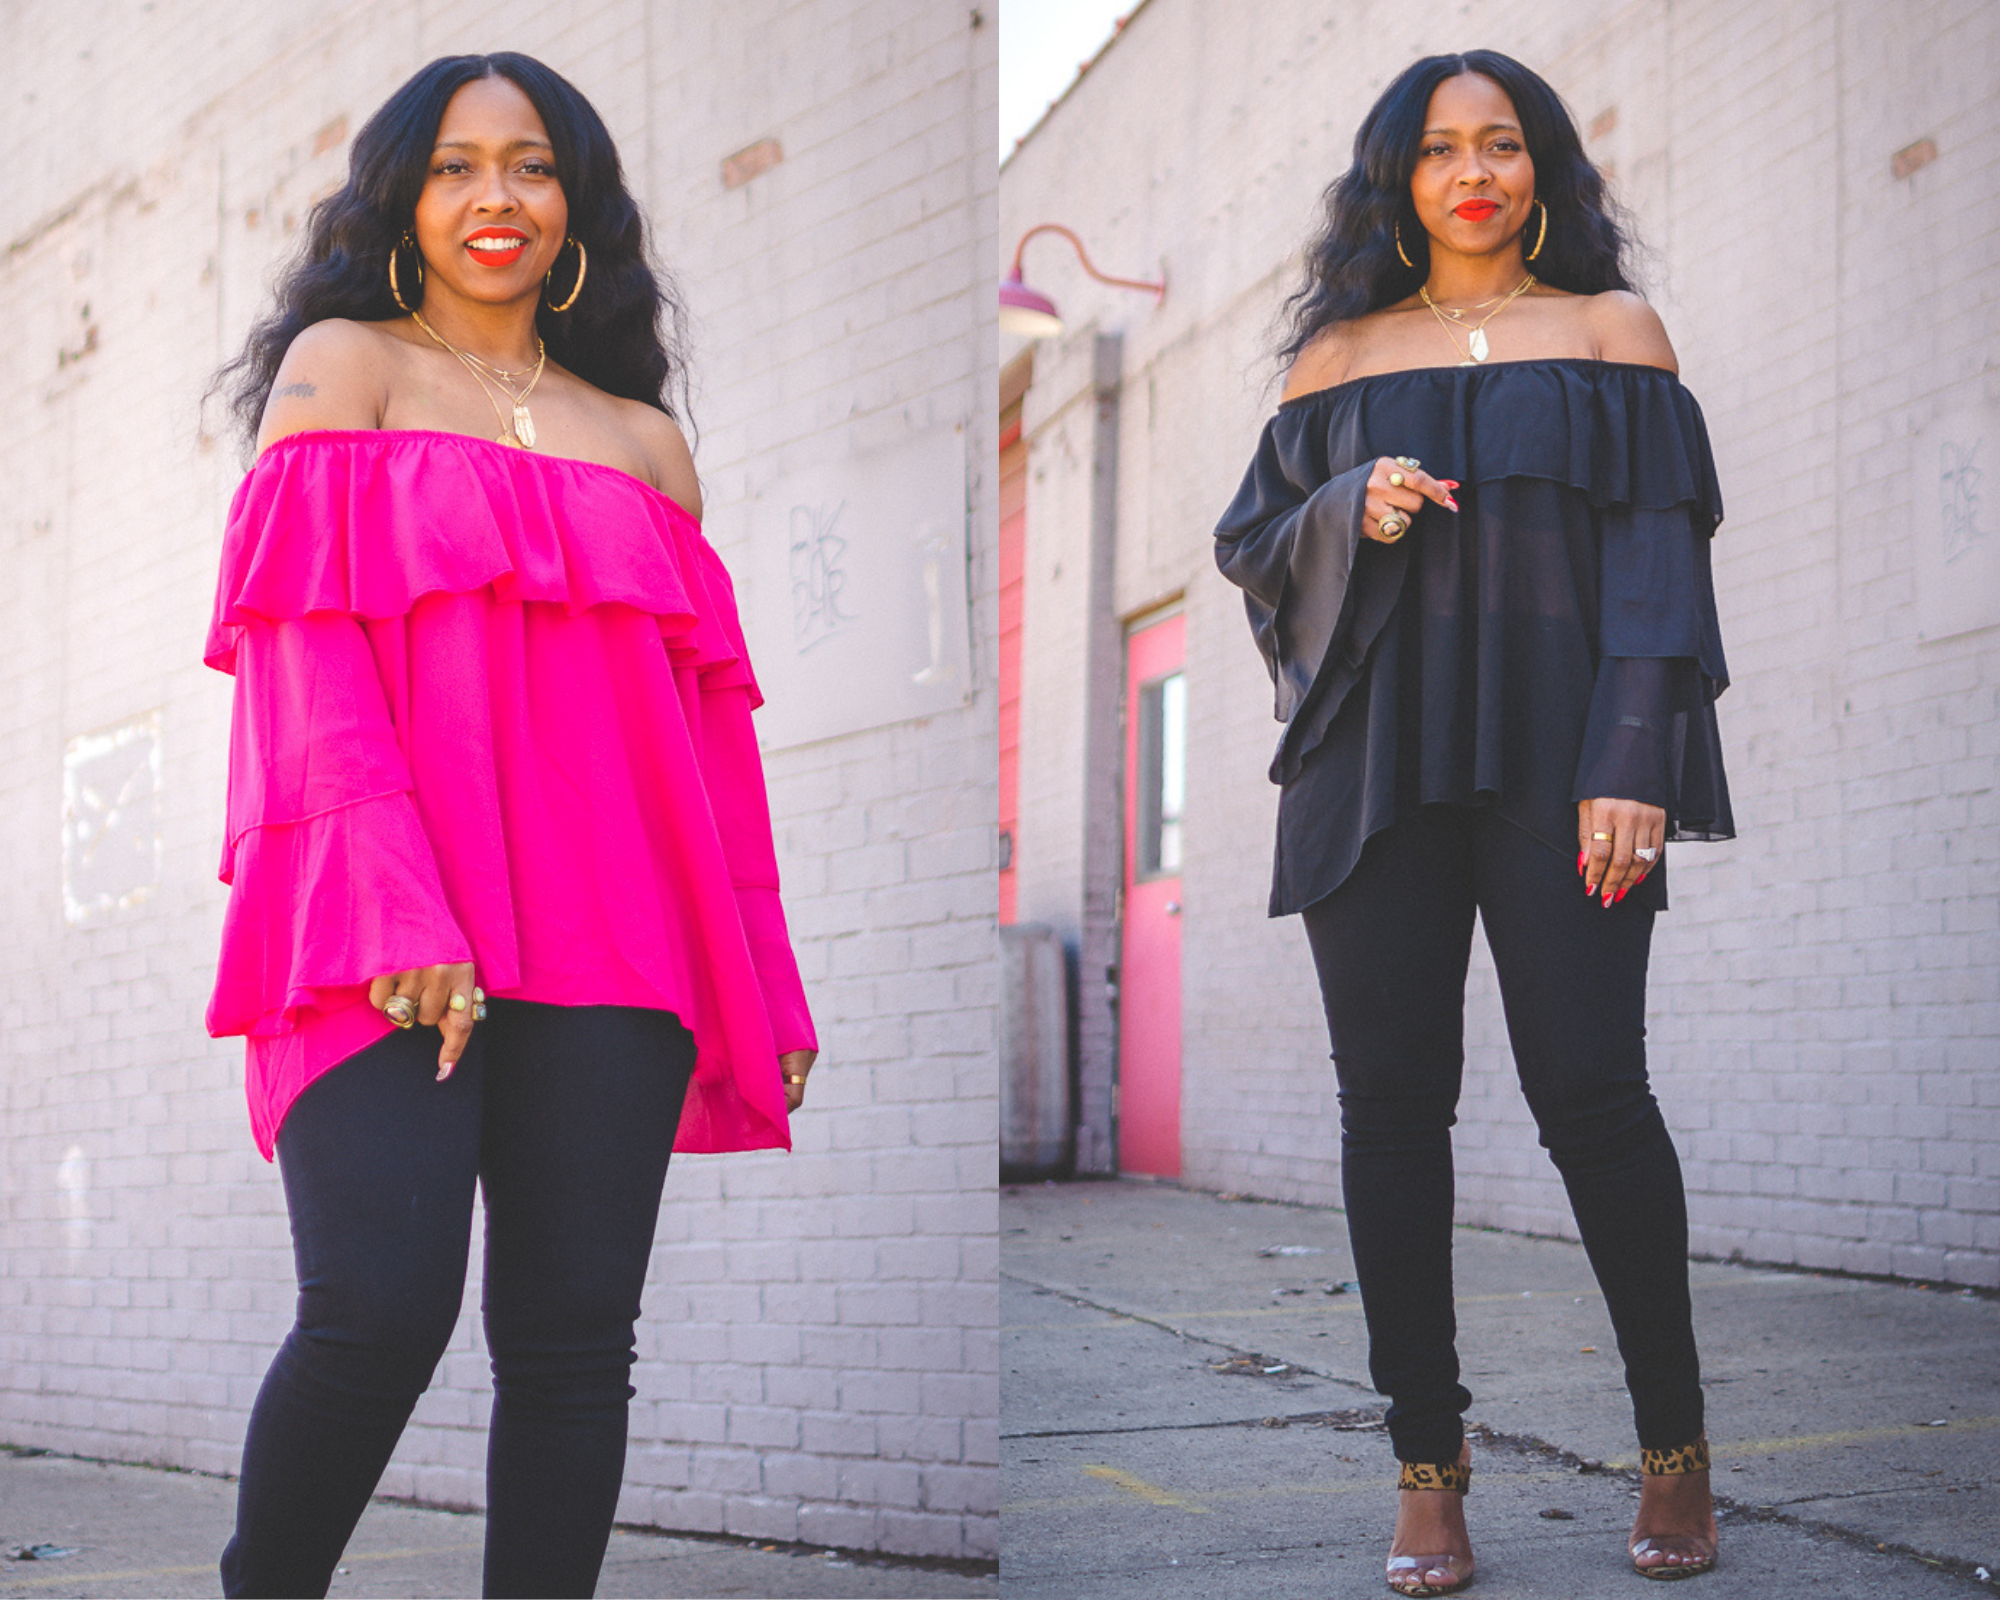 SWEENEE STYLE, OUTFIT IDEA, HOW TO WEAR ALL BLACK, LEOPARD SANDALS, EASY OUTFIT IDEAS, INDIANAPOLIS STYLE BLOG, BLACK GIRLS WHO BLOG